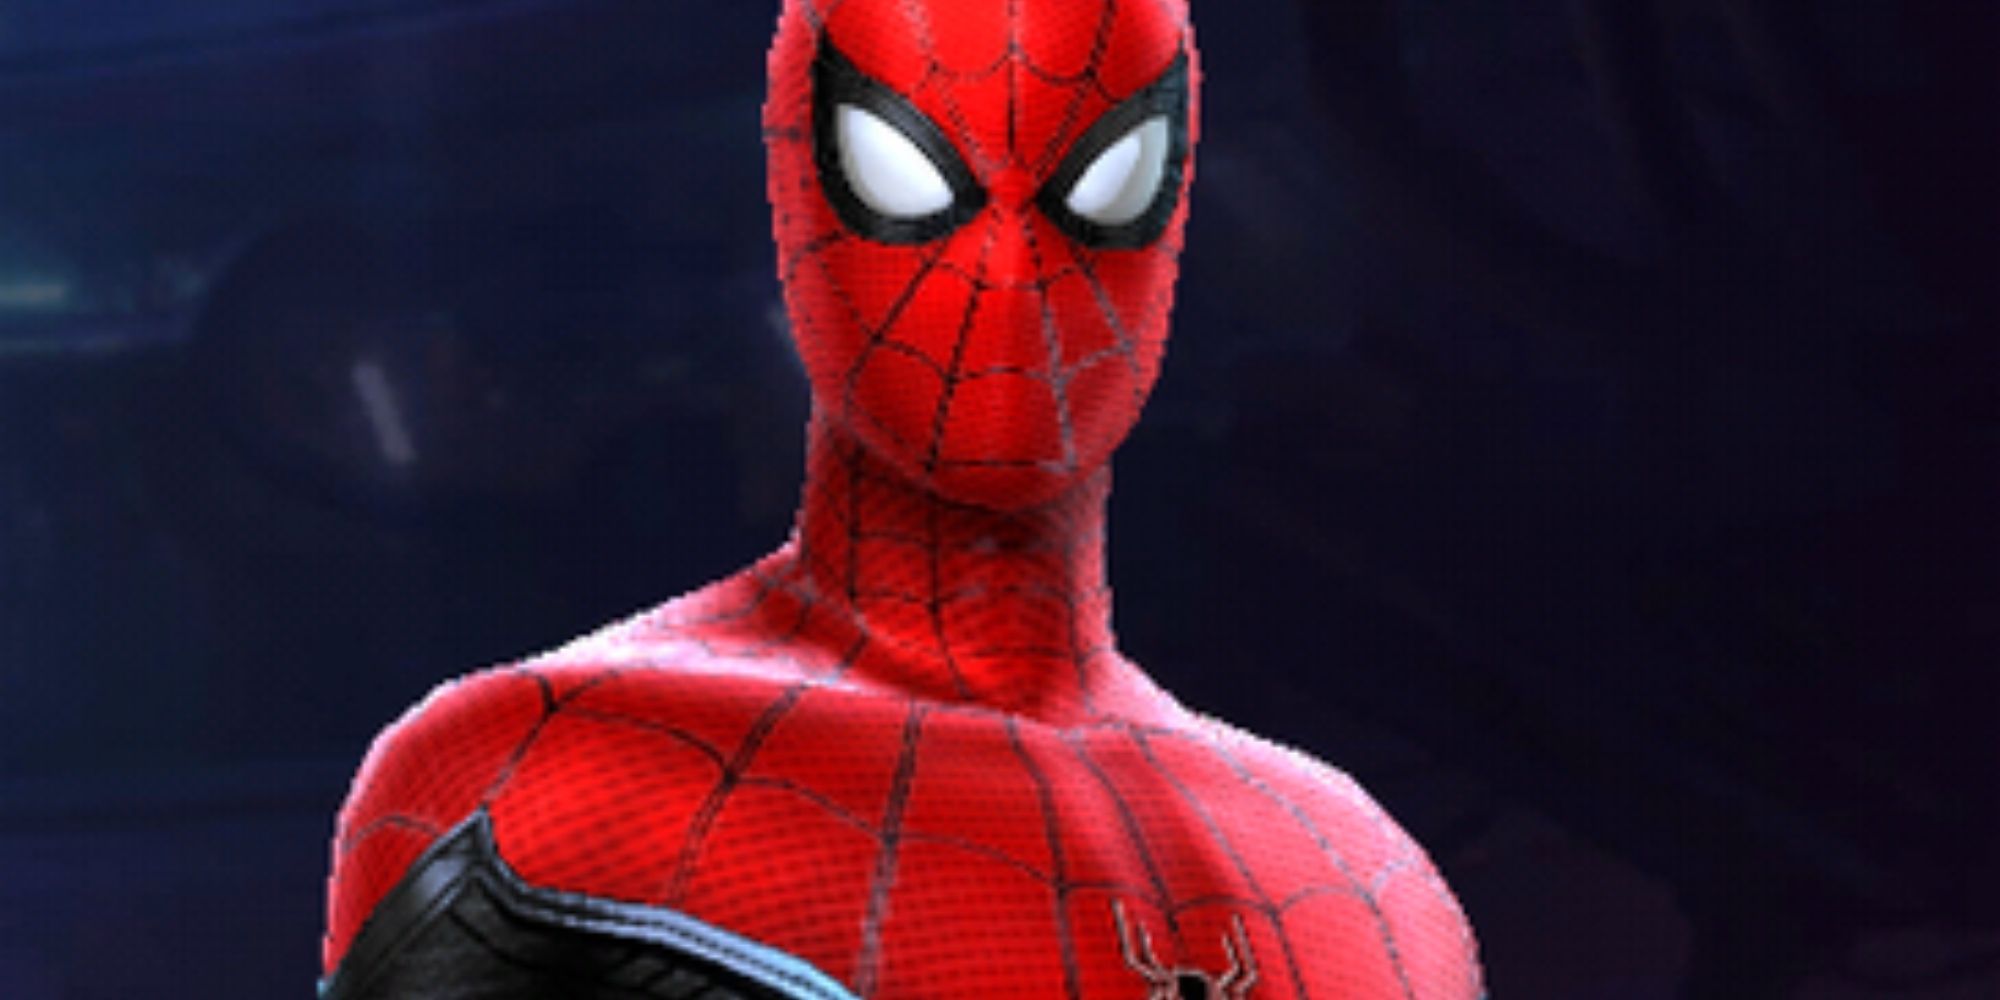 Character model of Spider-Man from Marvel Future Revolution.